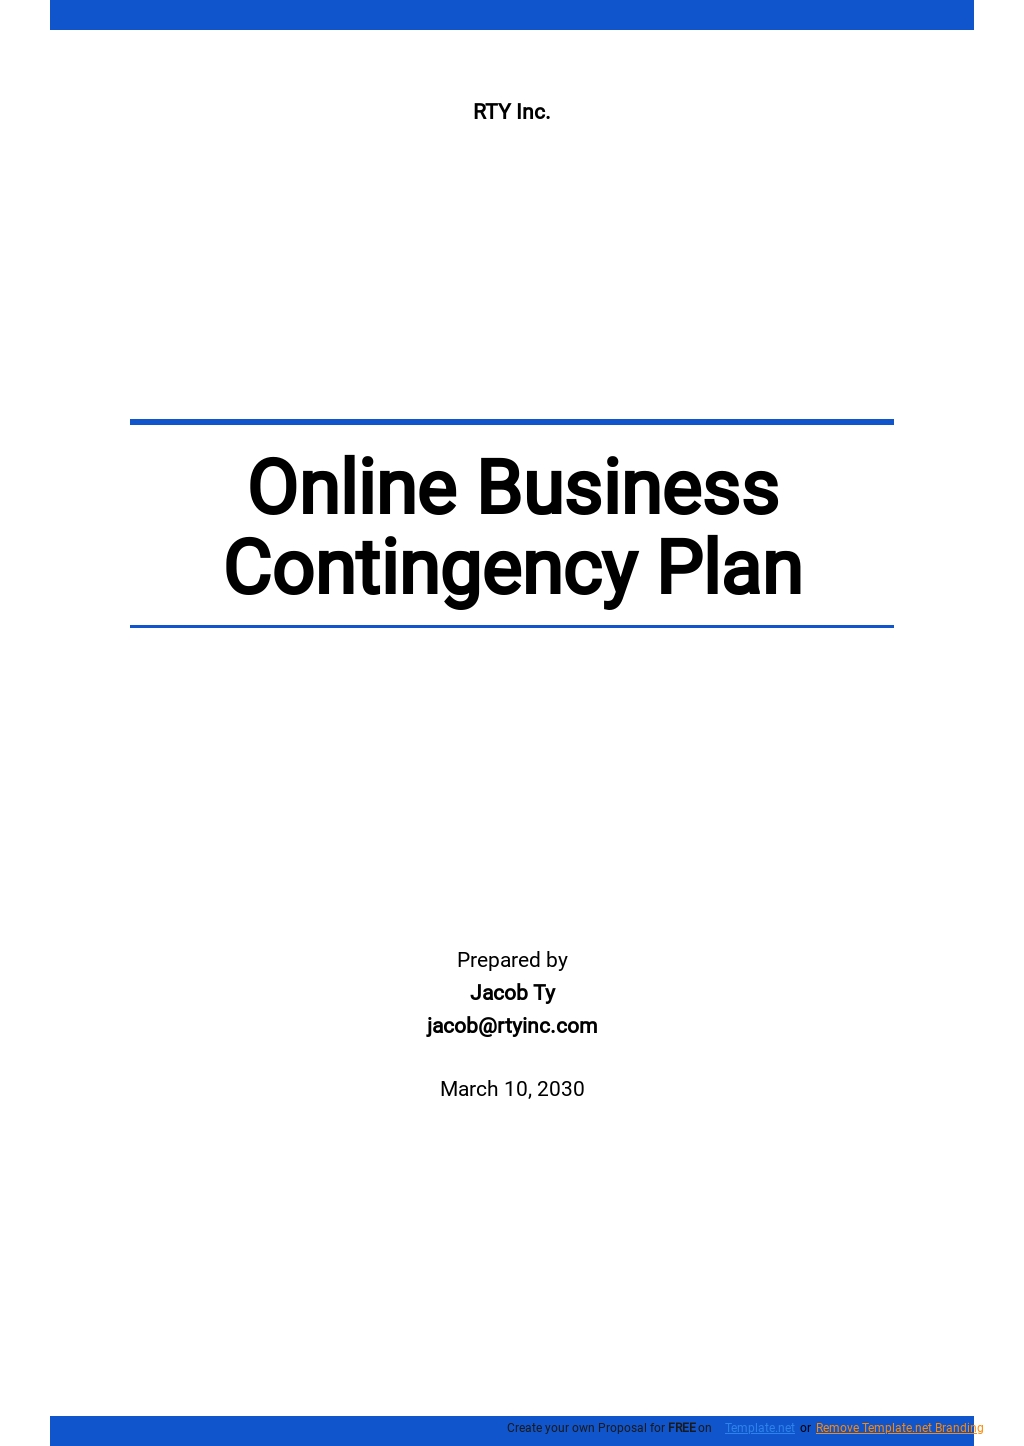 Online Business Contingency Plan Template